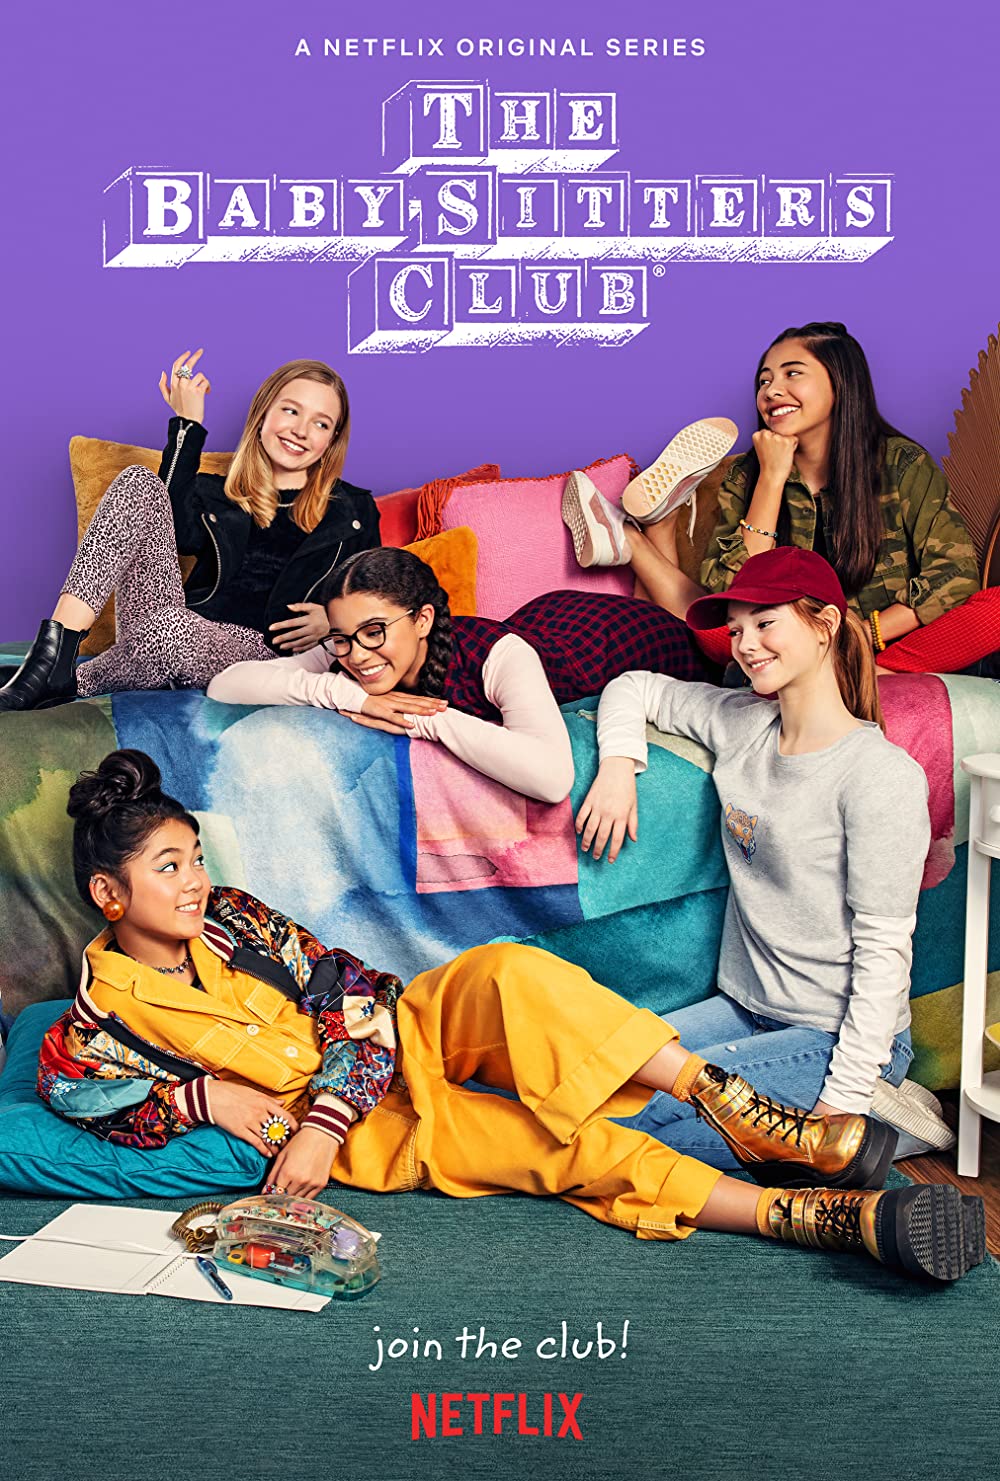 Is The Baby-Sitters Club on Netflix